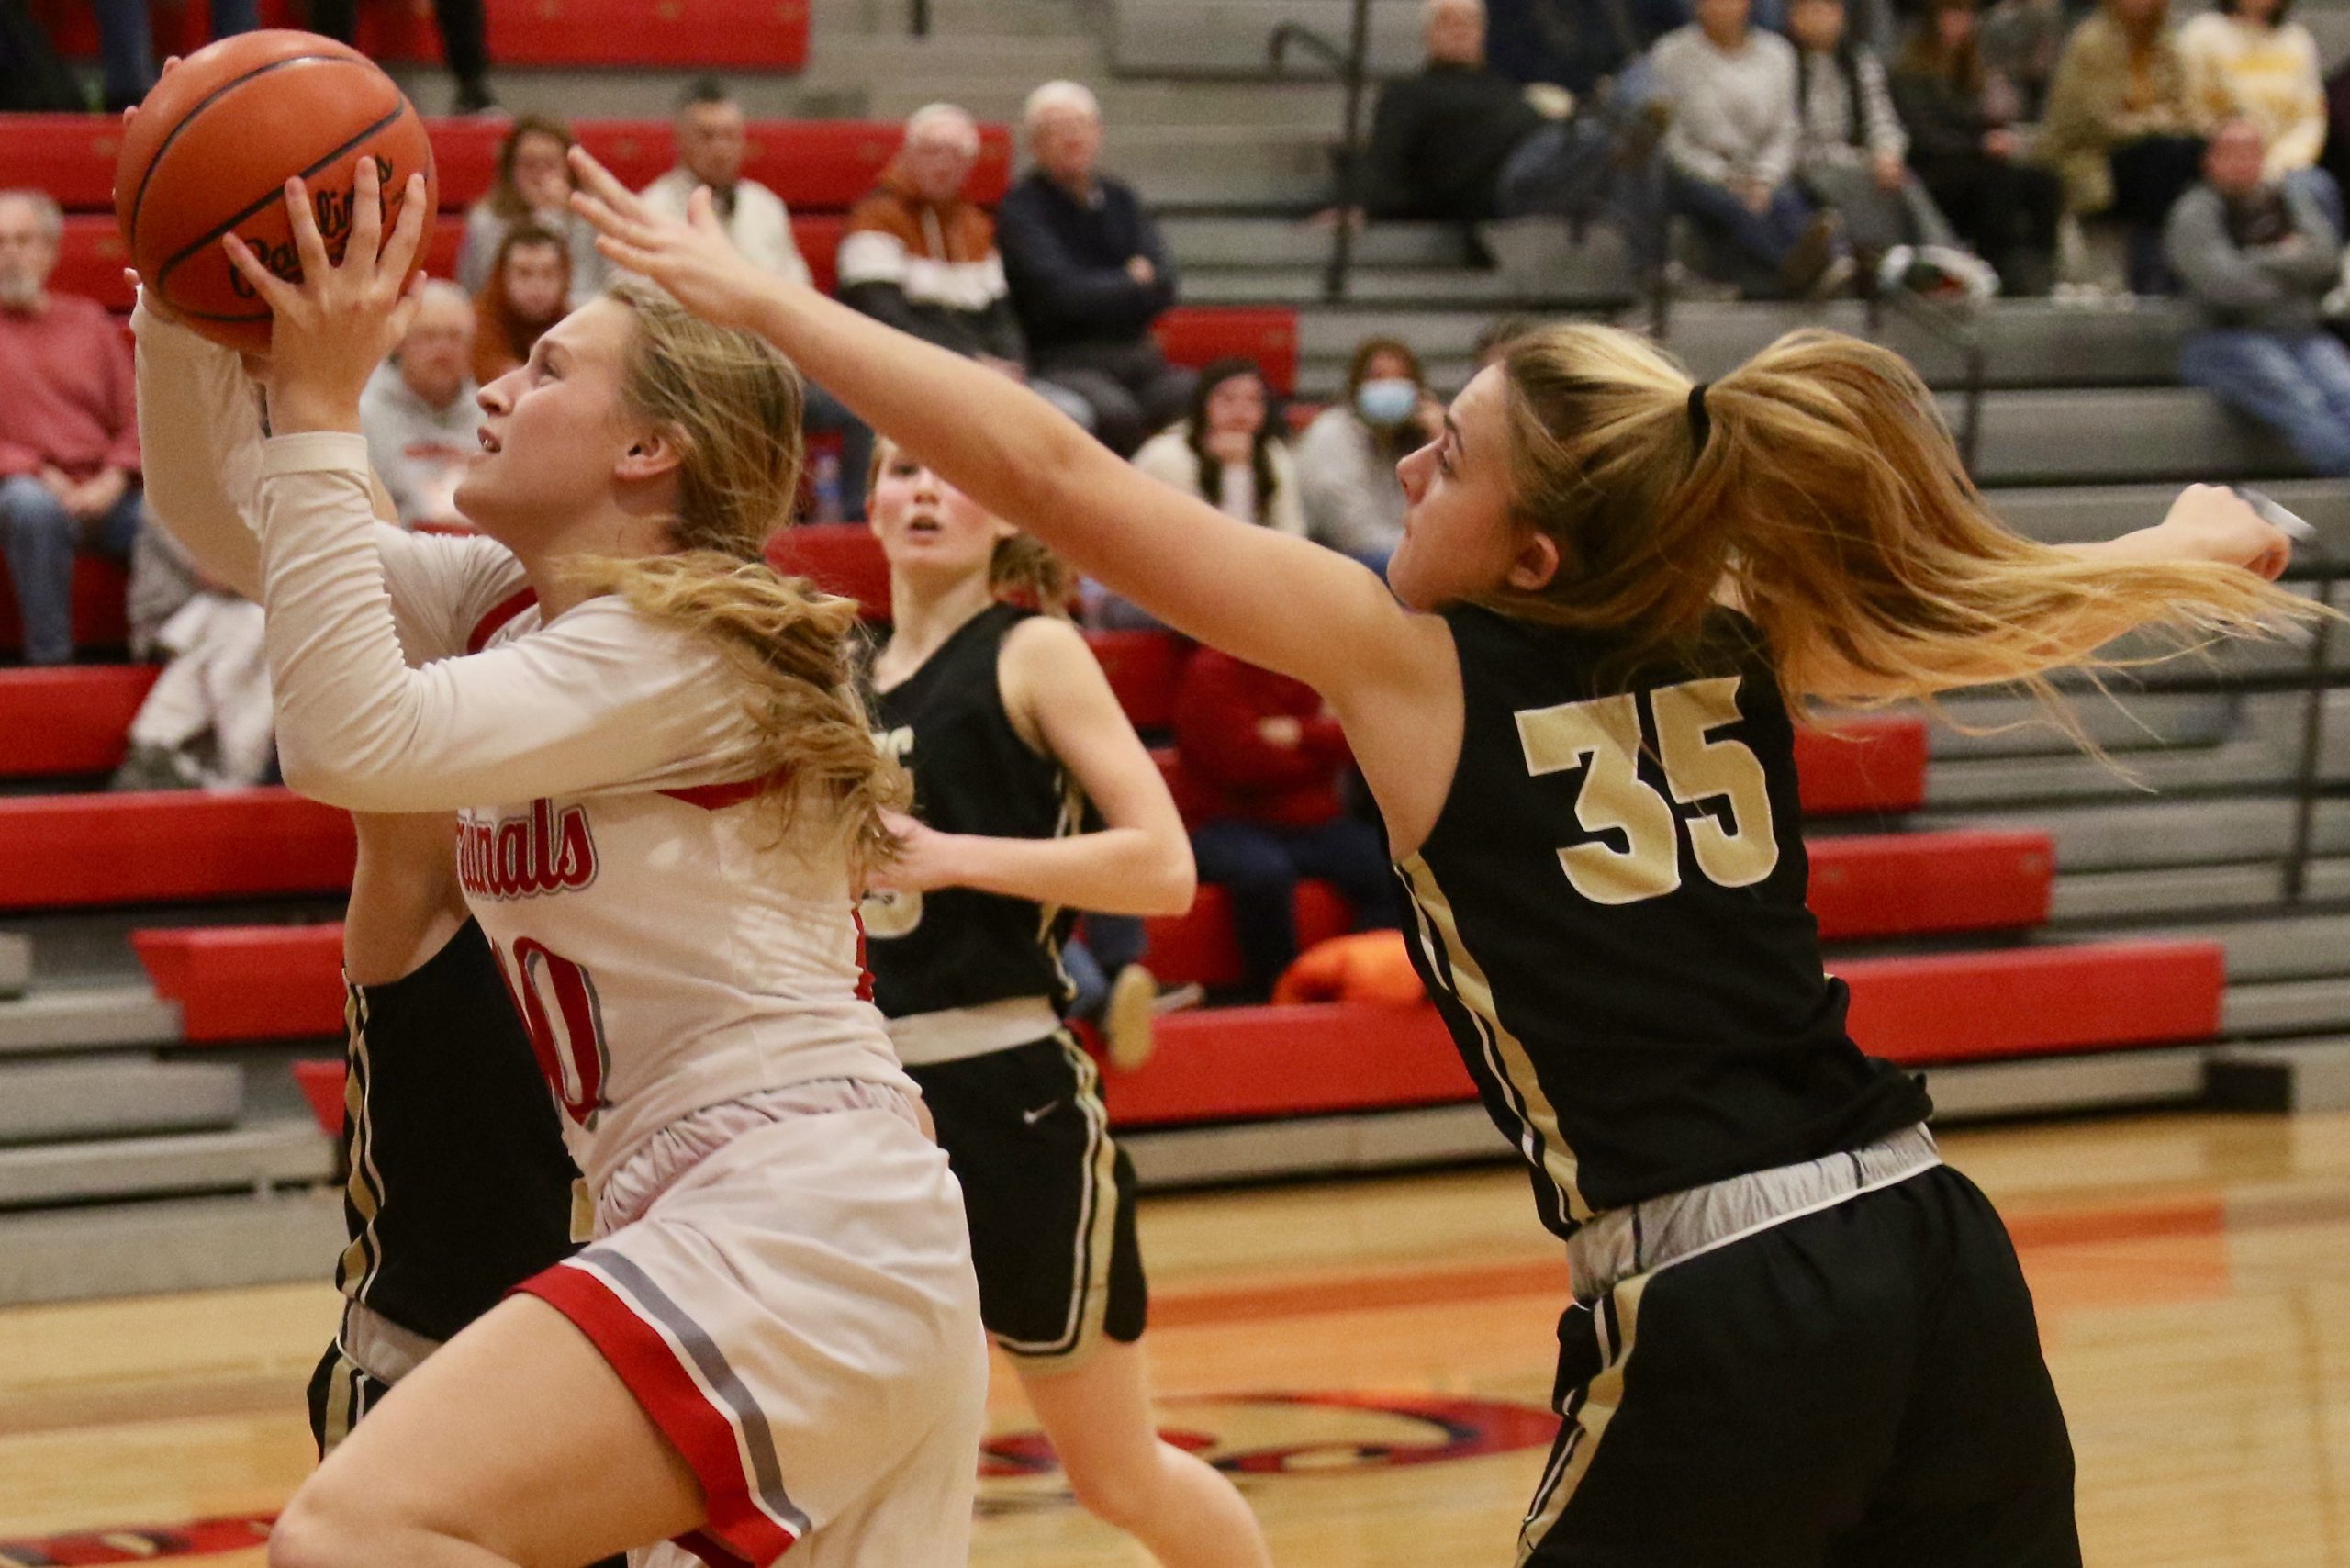 Sandy Valley’s Jordan Parker drives to the basket as Tuscarawas Central Catholic’s Delaney Savage defends in the game Wednesday (JMN Sports/Jim Cummings).